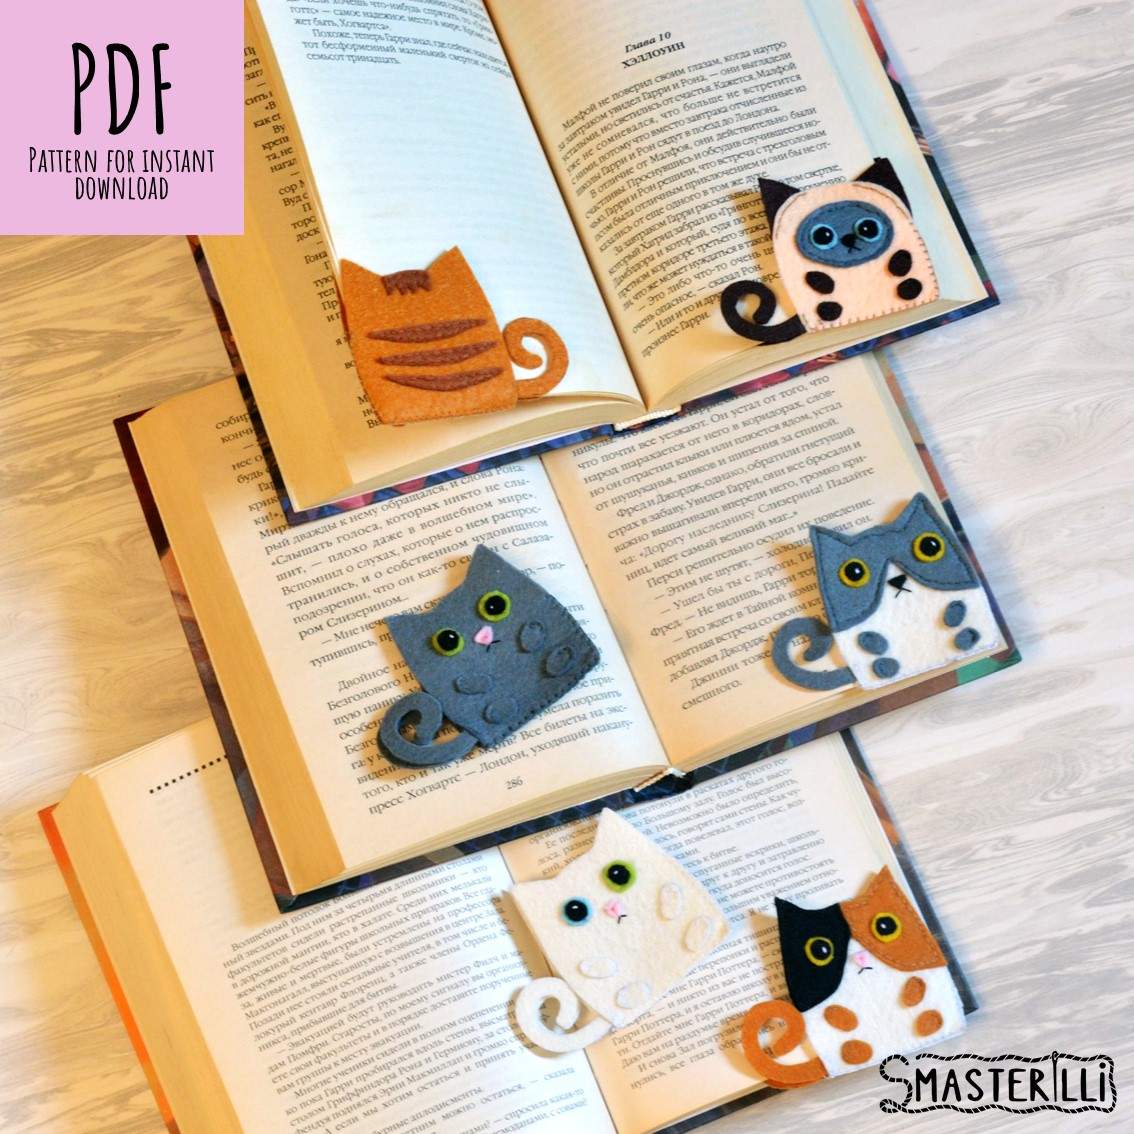 Make the perfect reading companion with these DIY Cat Felt Bookmarks Pattern PDF & Tutorial. Create 6 unique animal felt corner bookmarks that will make a great addition to any library.